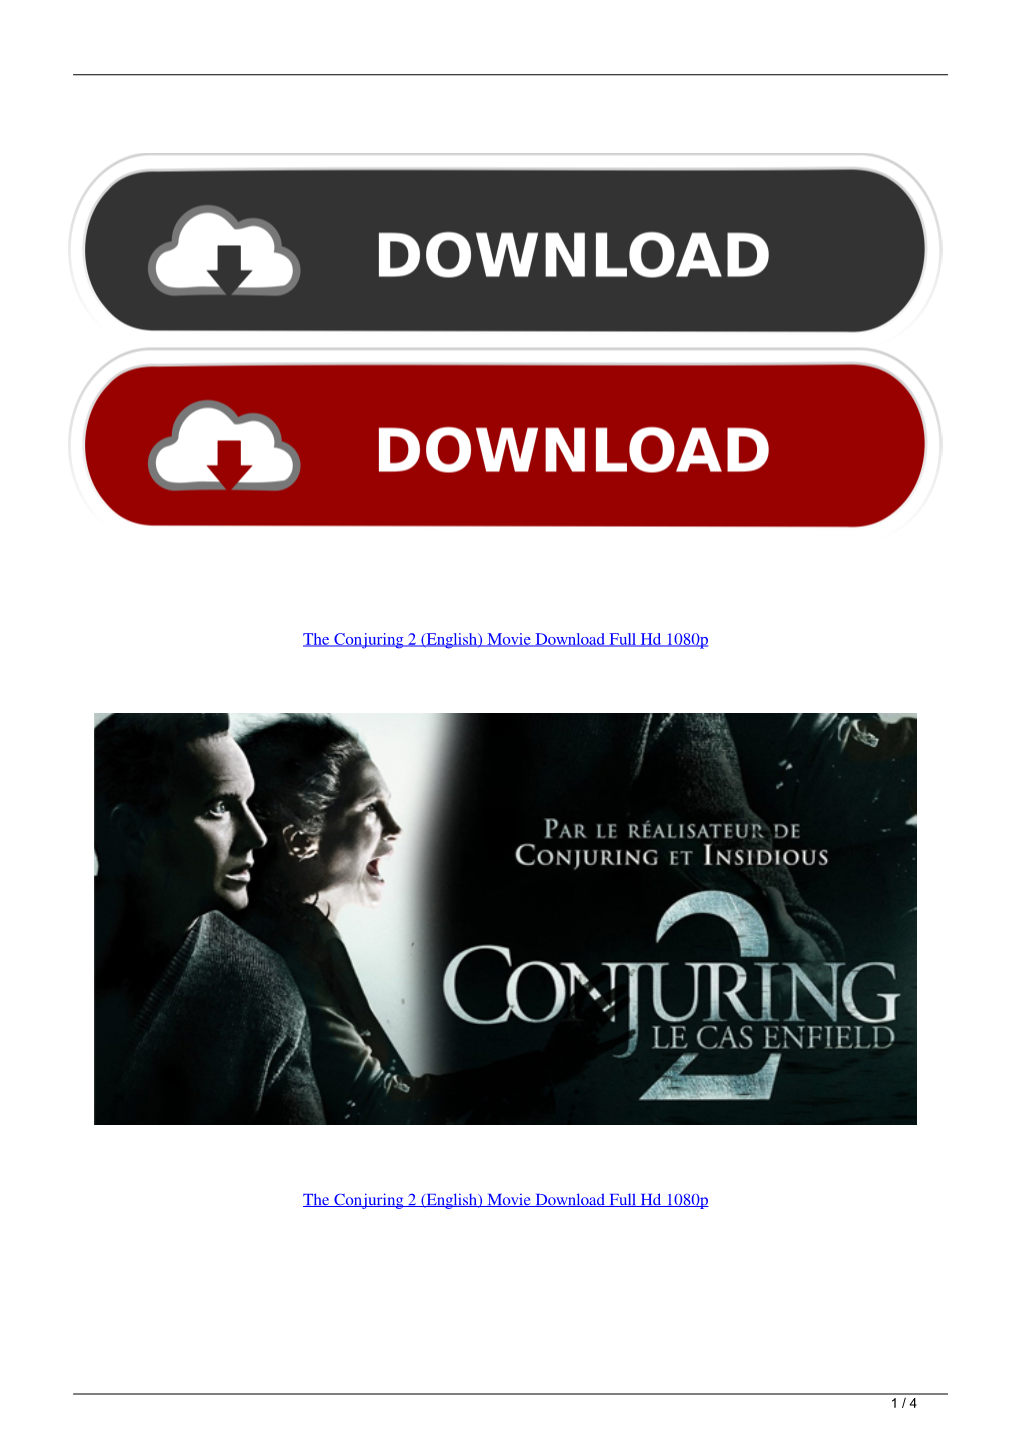 The Conjuring 2 English Movie Download Full Hd 1080P